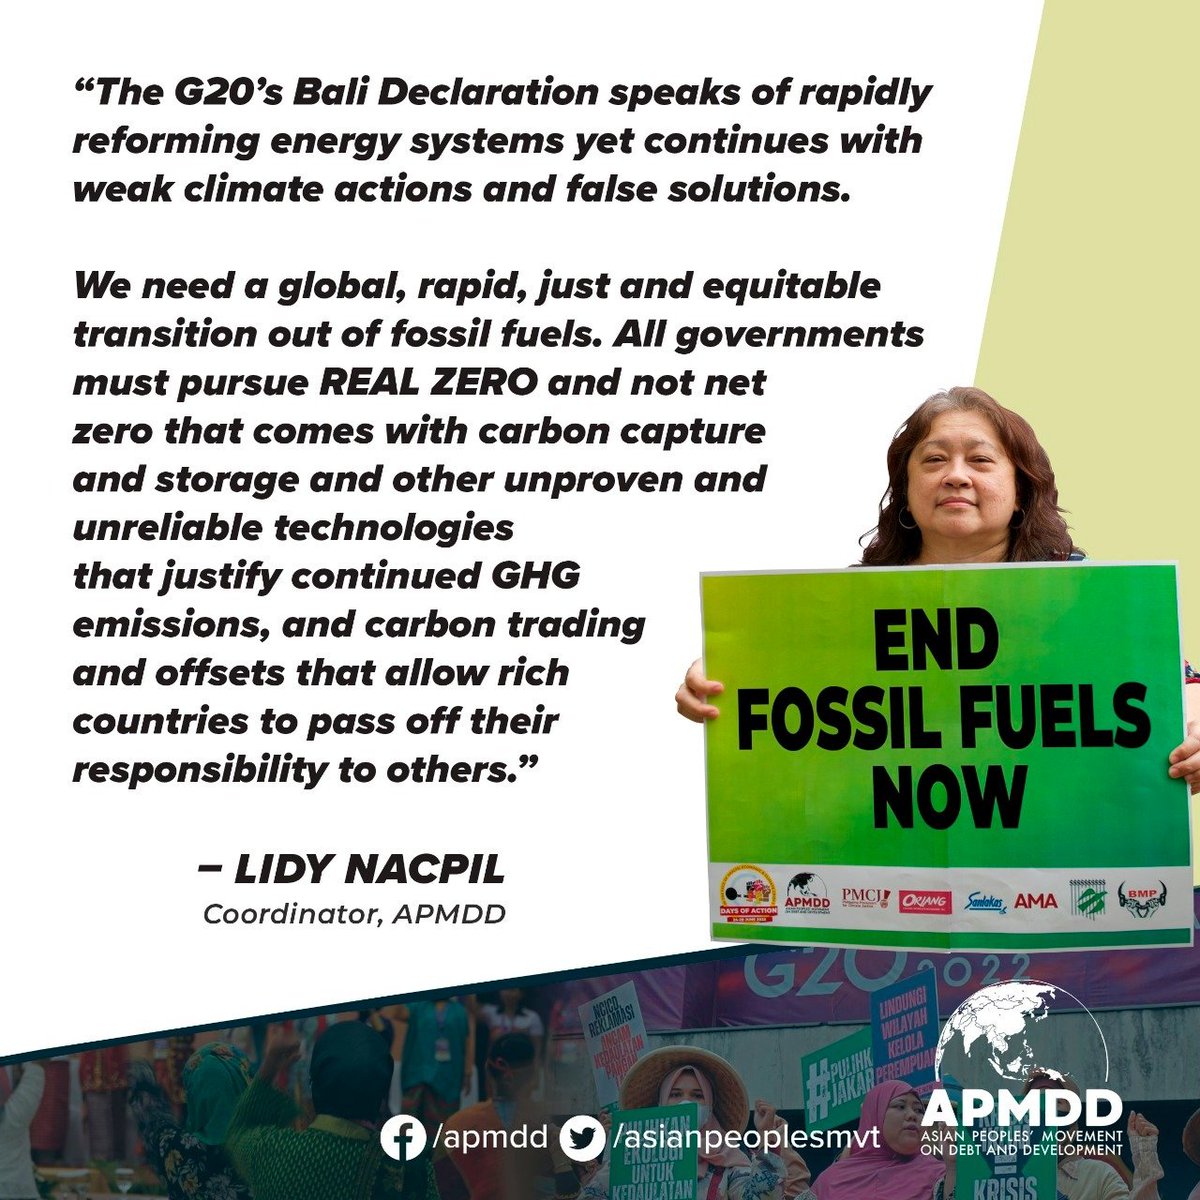 The urgency to scale up & speed up efforts towards decarbonization has already been established but the #G20 continues its laid back & evasive tradition w/ the #G20BaliDeclaration. 

Rapid & #JustTransition #NotoFossilGasAsTransitionFuel  #NotoFalseSolutions #RealZeroNotNetZero